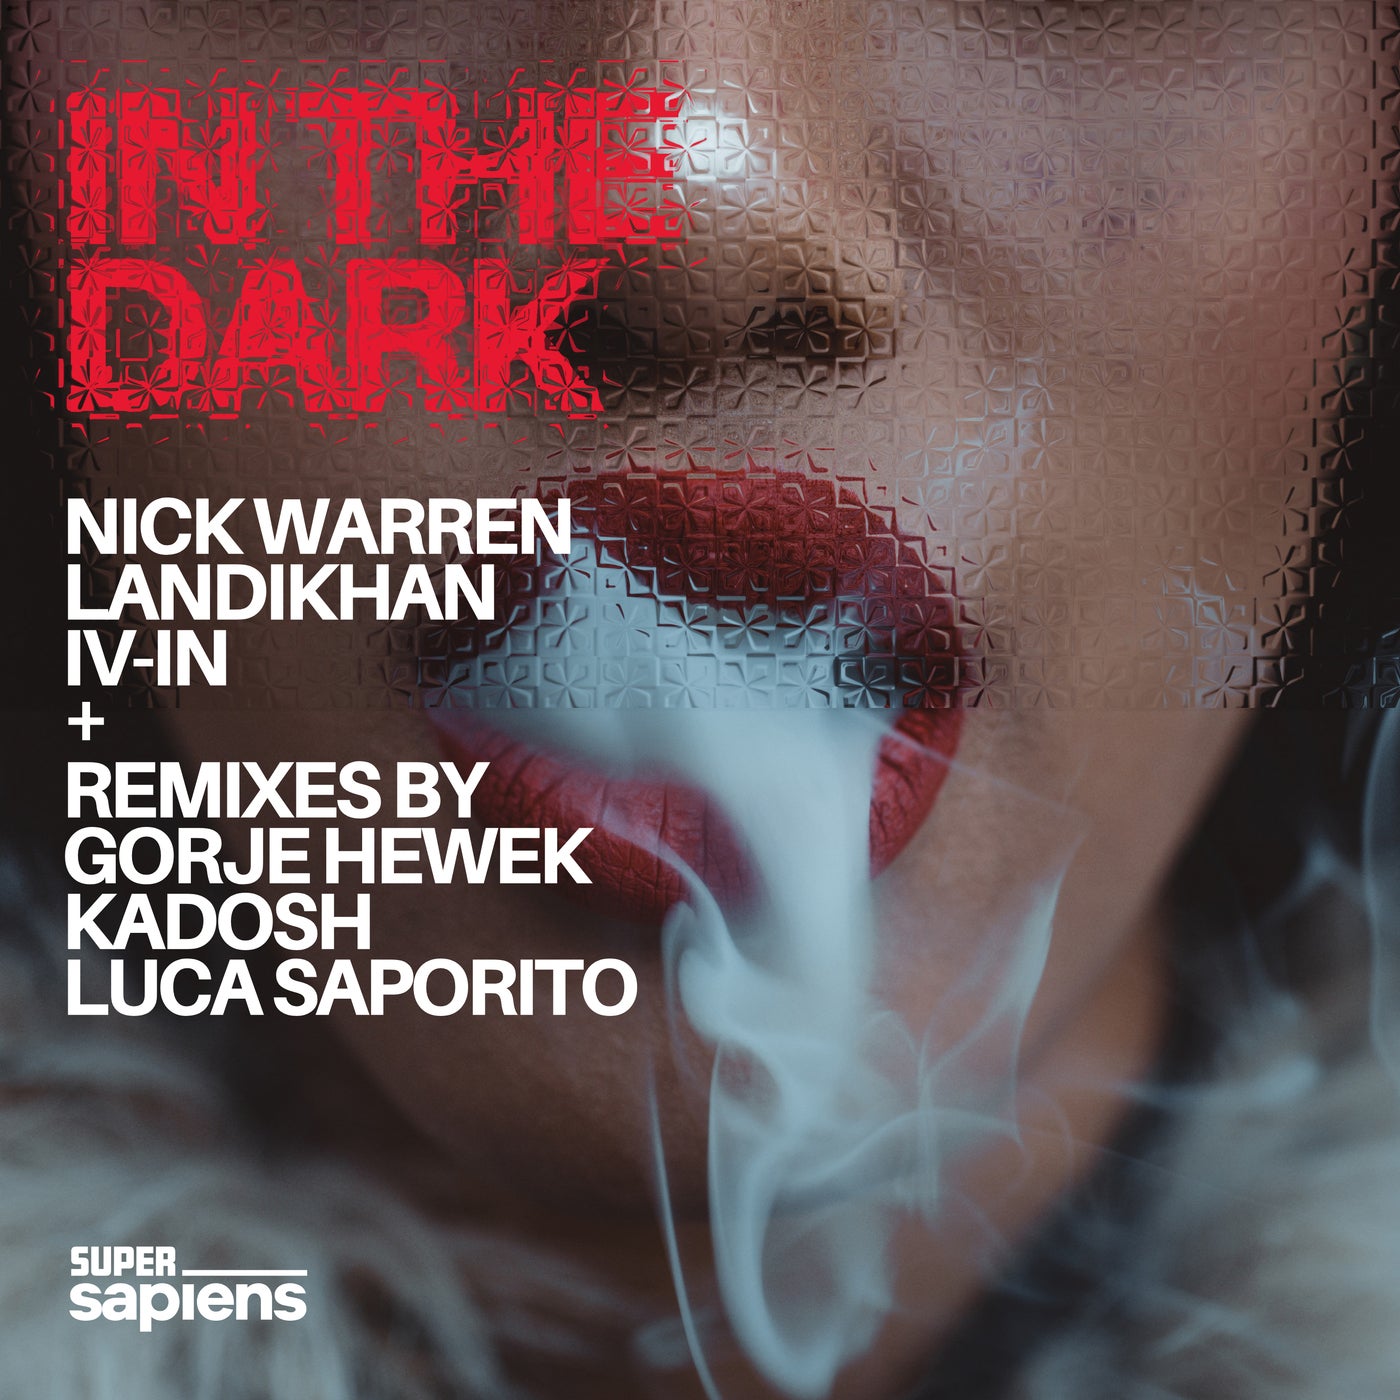 Release Cover: In The Dark Download Free on Electrobuzz